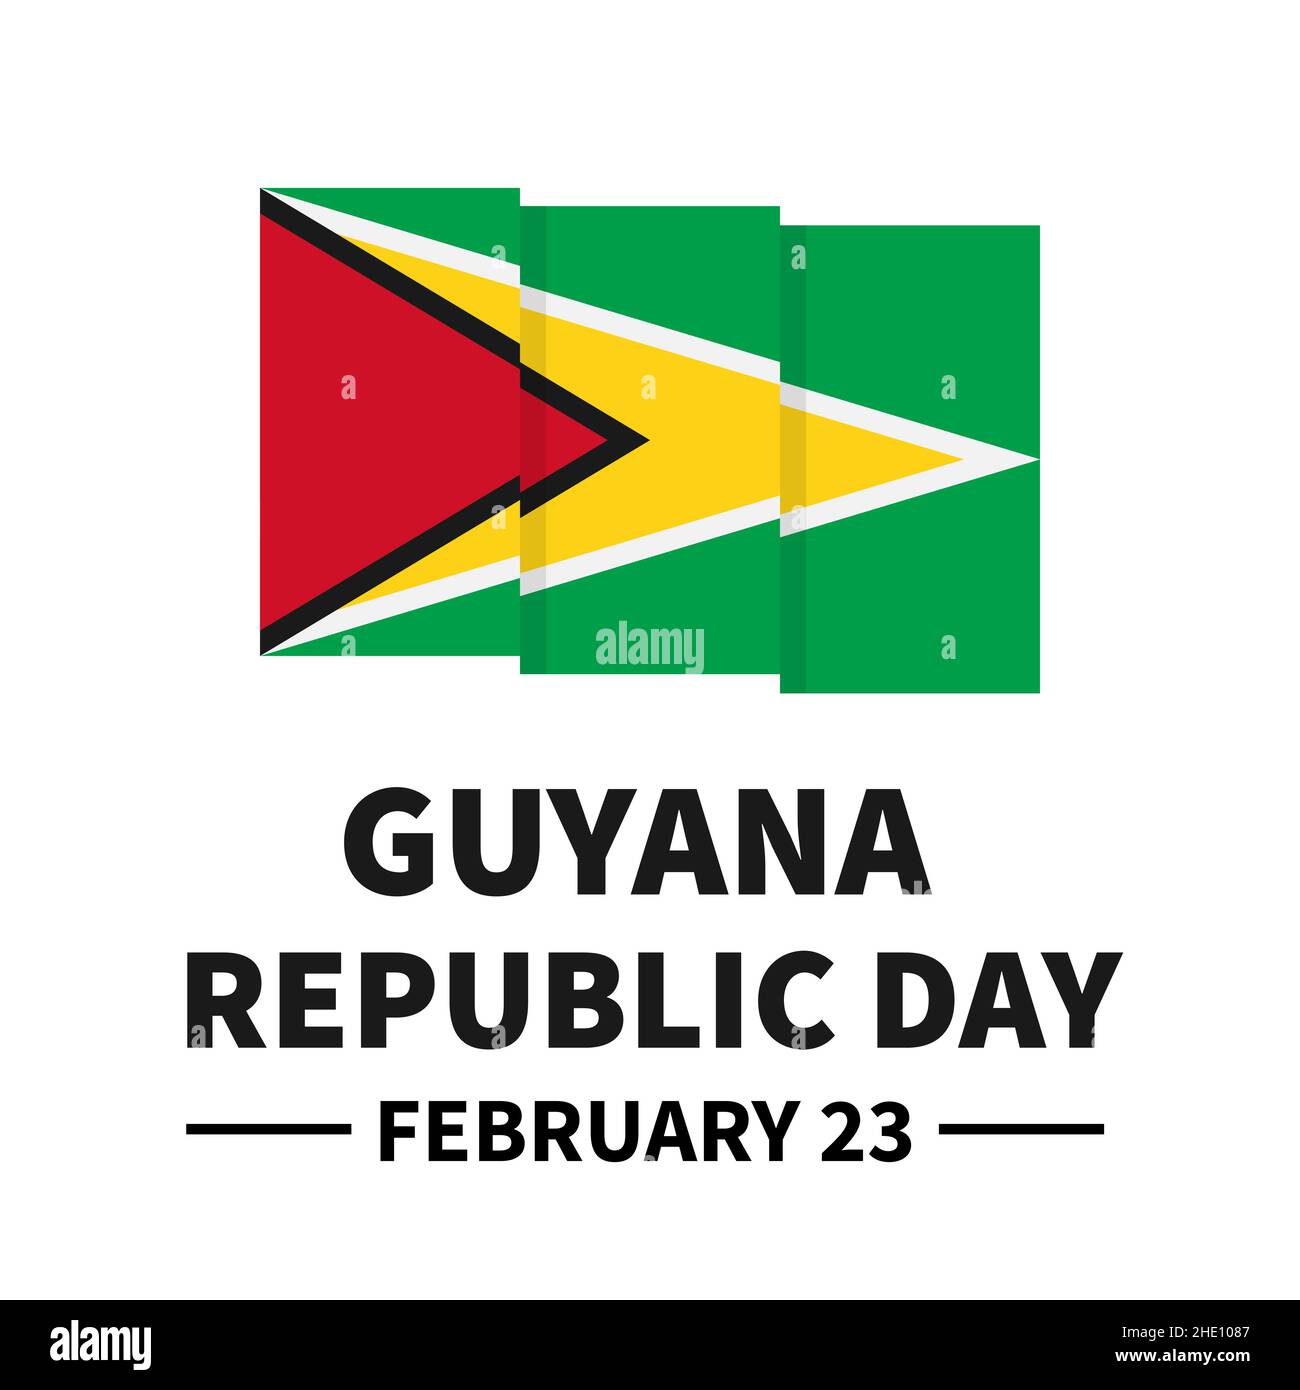 Guyana Republic Day typography poster with flag. National holiday celebrated on February 23. Vector template for banner, greeting card, flyer, etc. Stock Vector